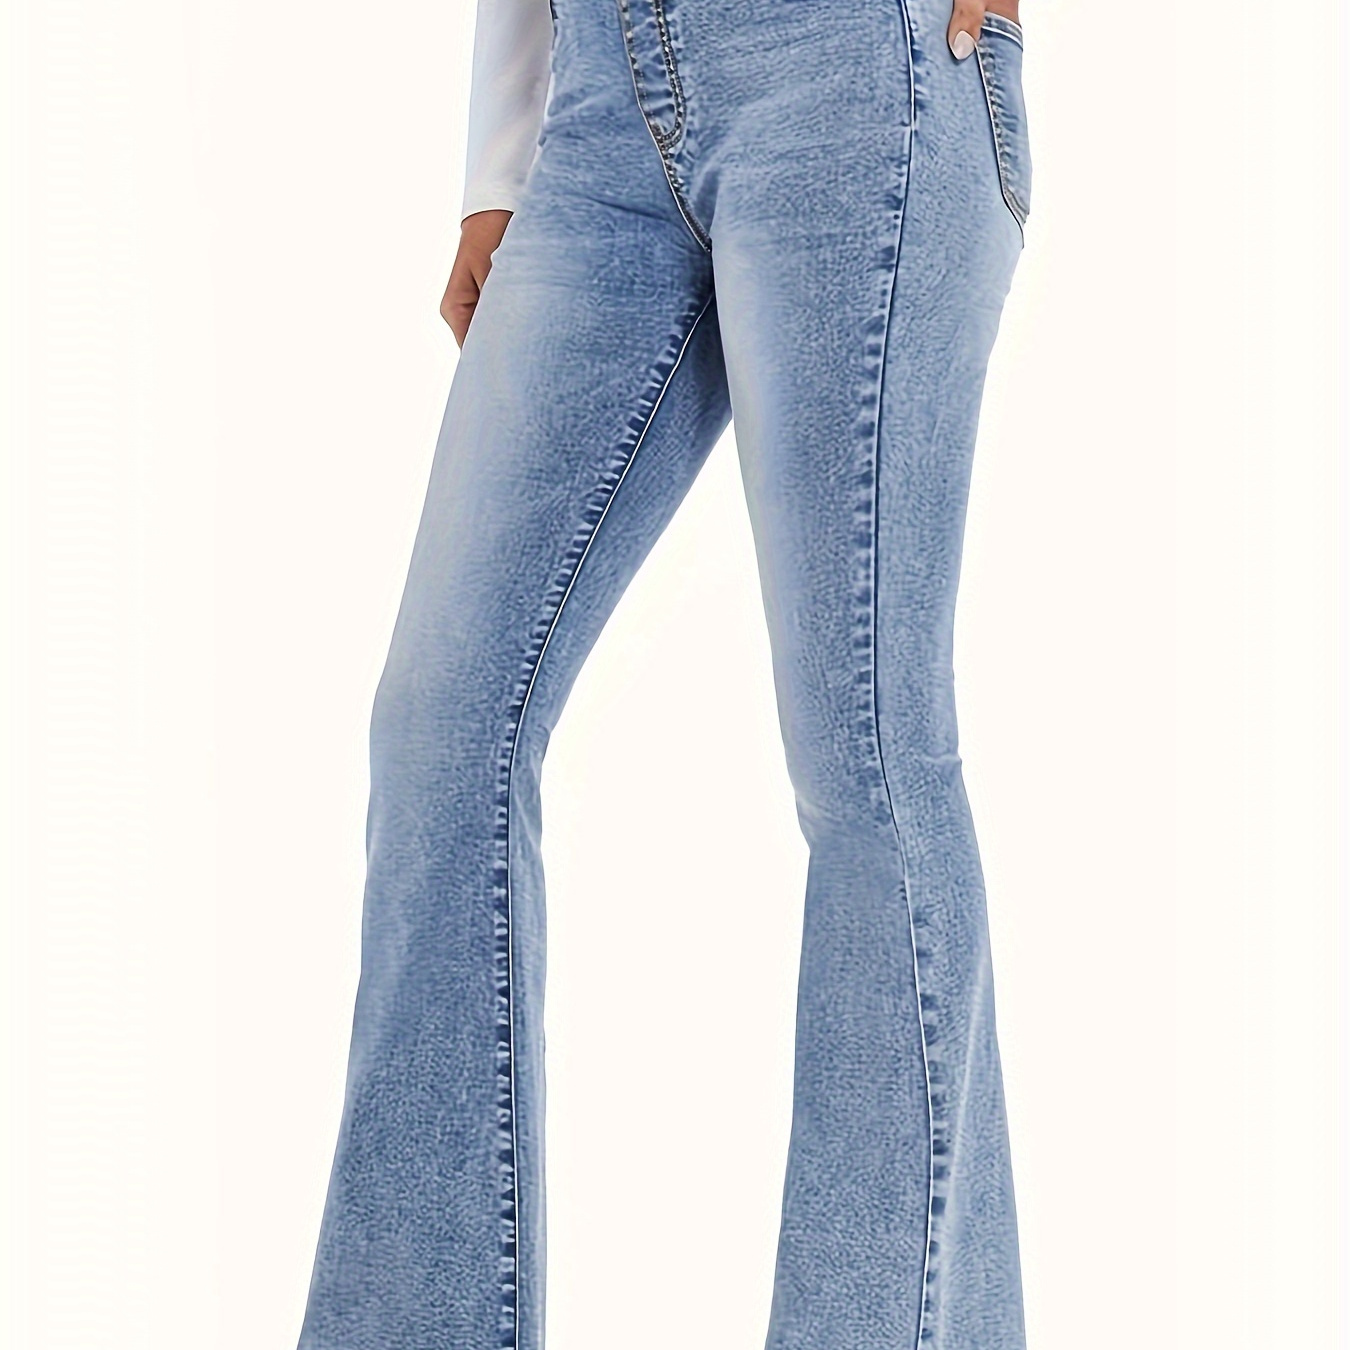 

Women's Elastic Waist Stretchy Flared Jeans, Vintage Style Bell Bottom Pants For Casual Wear